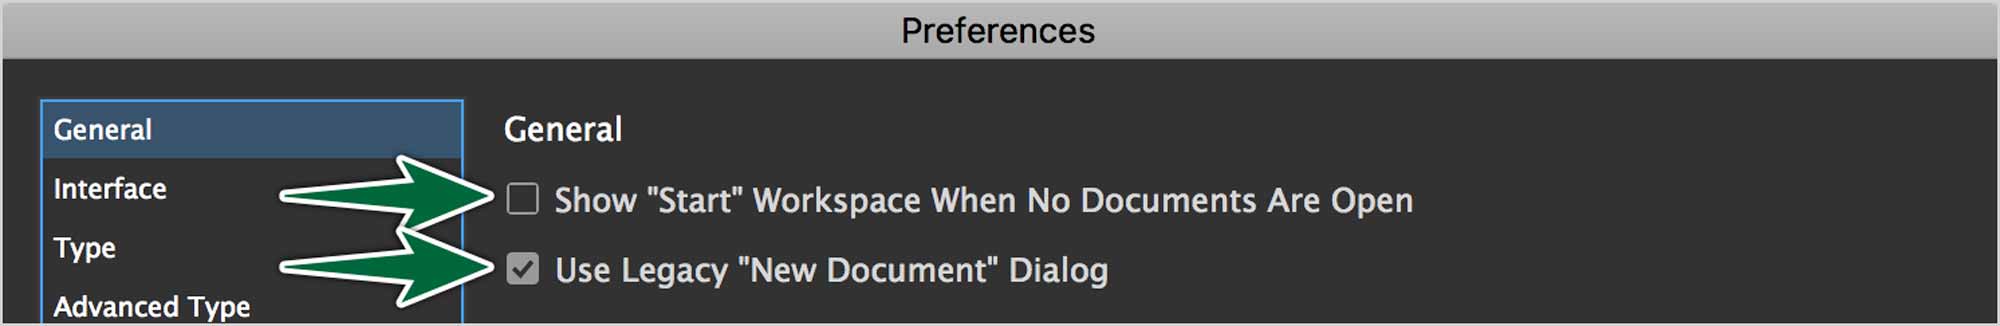 indesign-new-document-dialogue